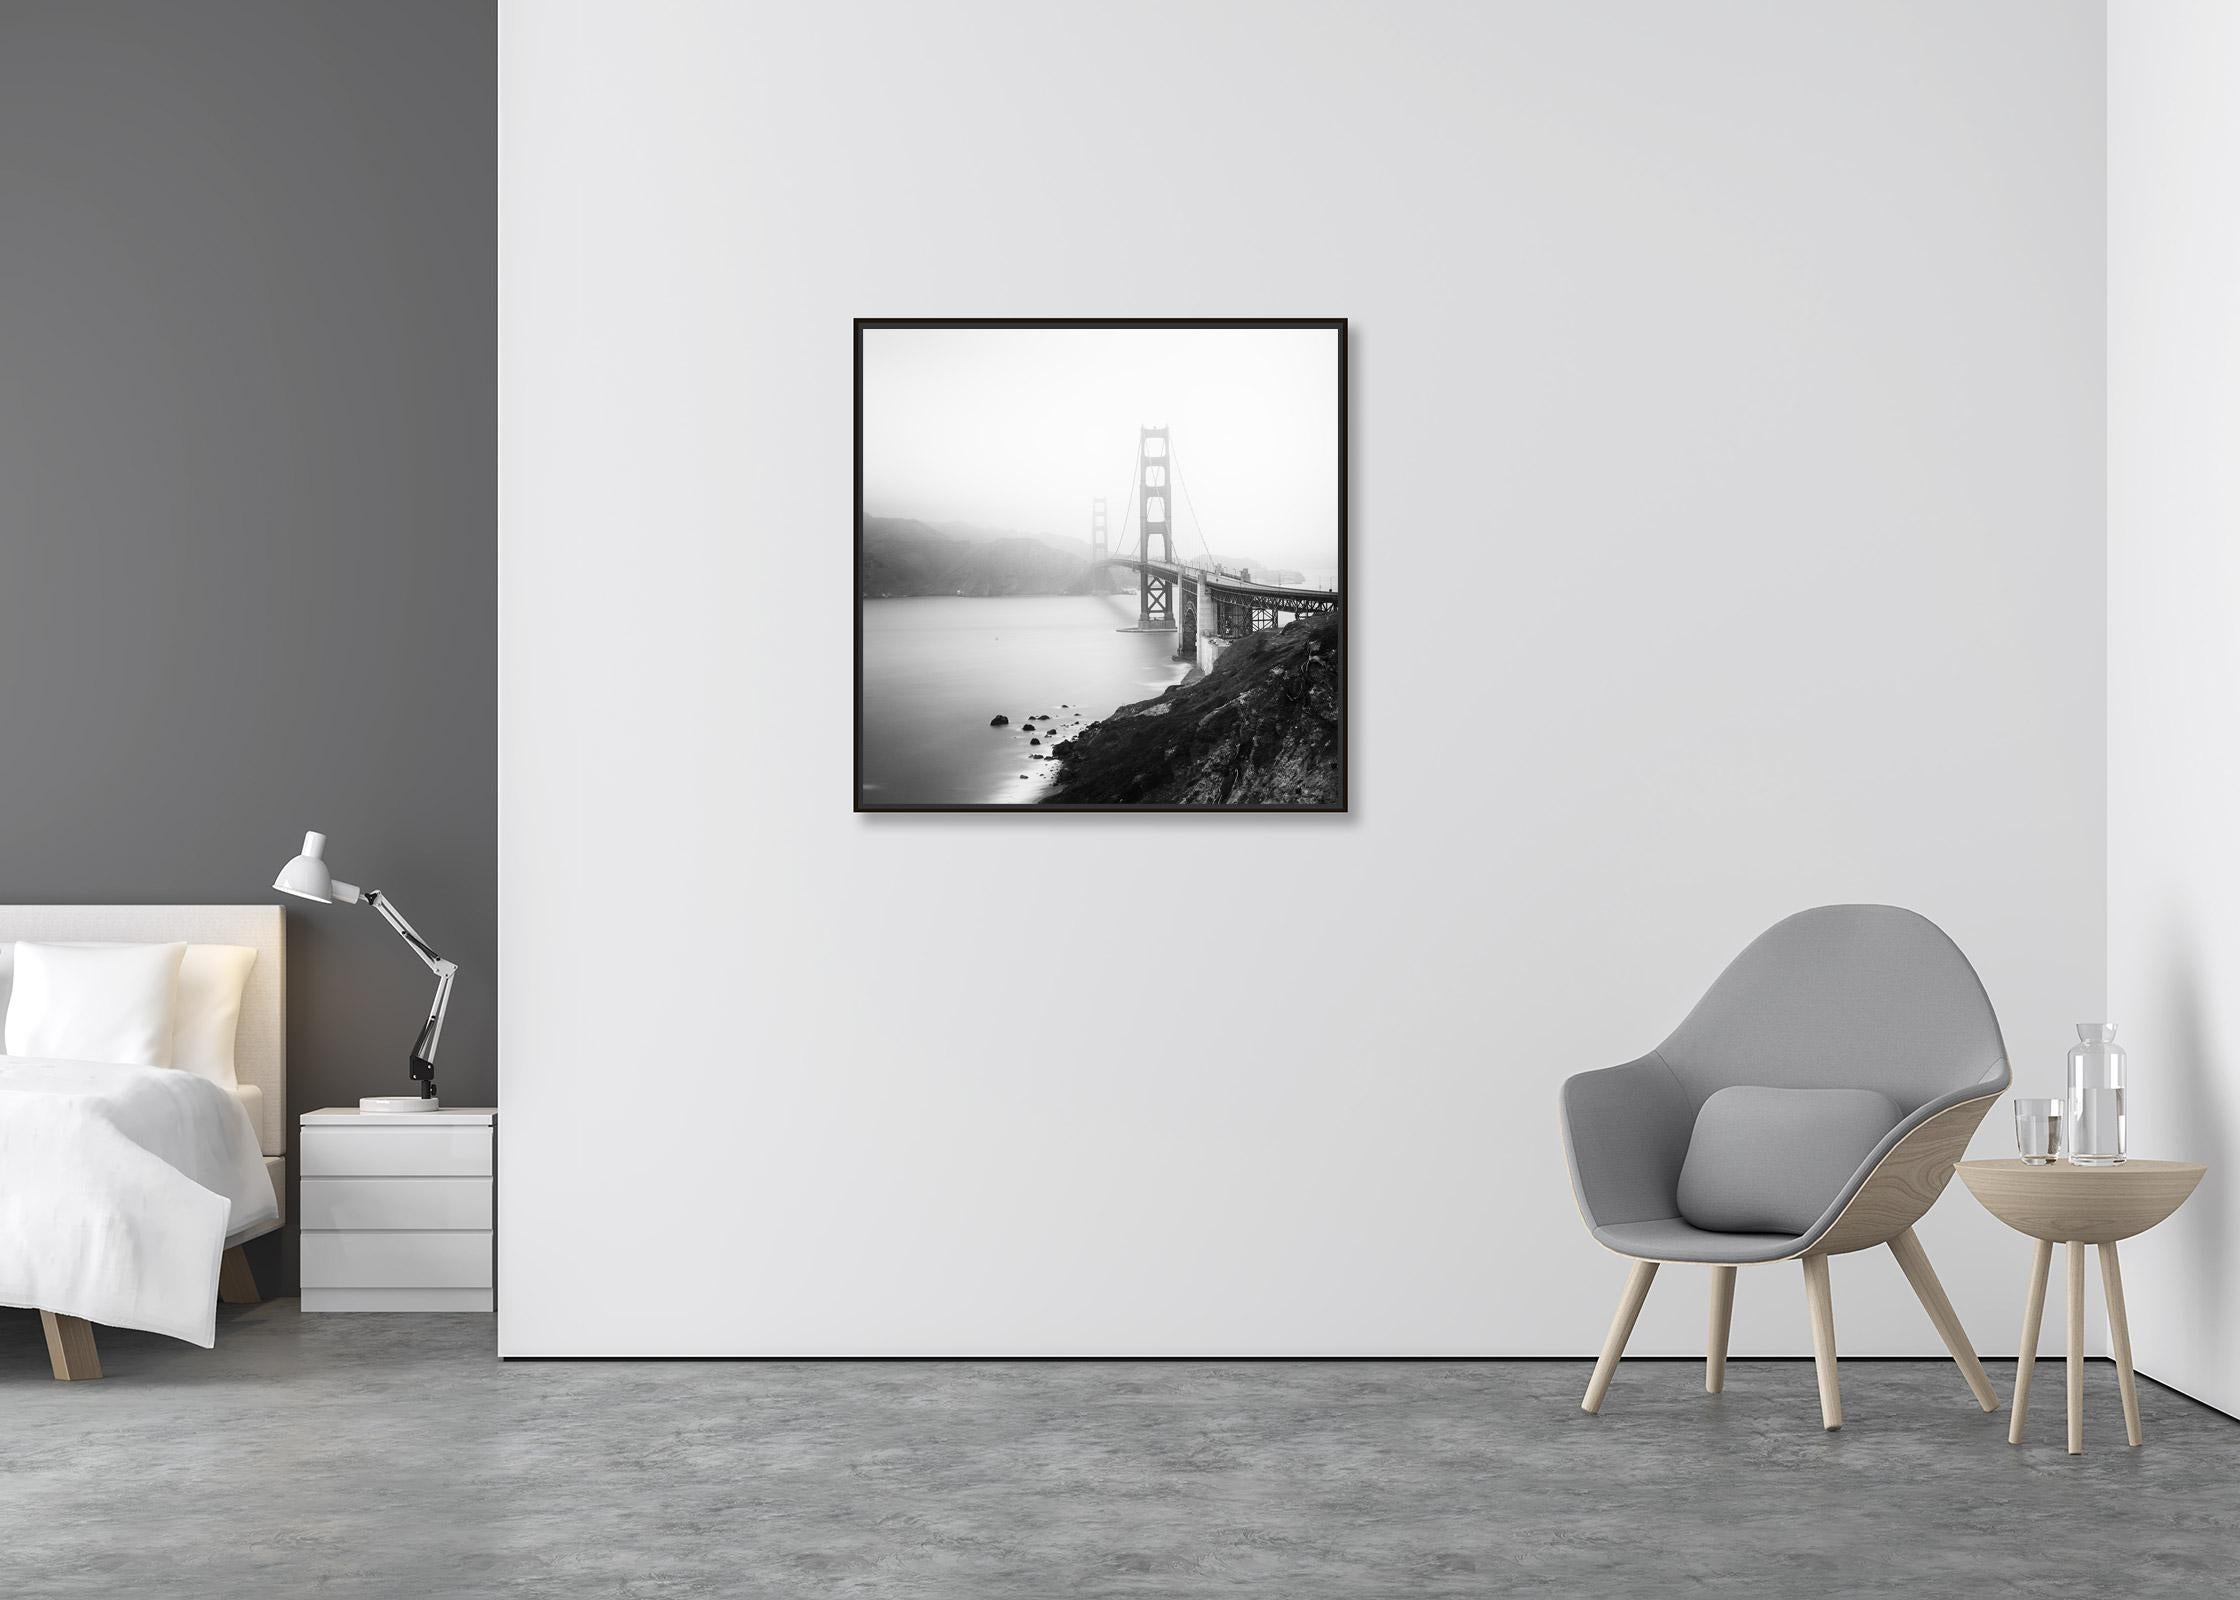 Golden Gate Bridge, San Francisco, Architecture, black and white fine art print - Contemporary Photograph by Gerald Berghammer, Ina Forstinger